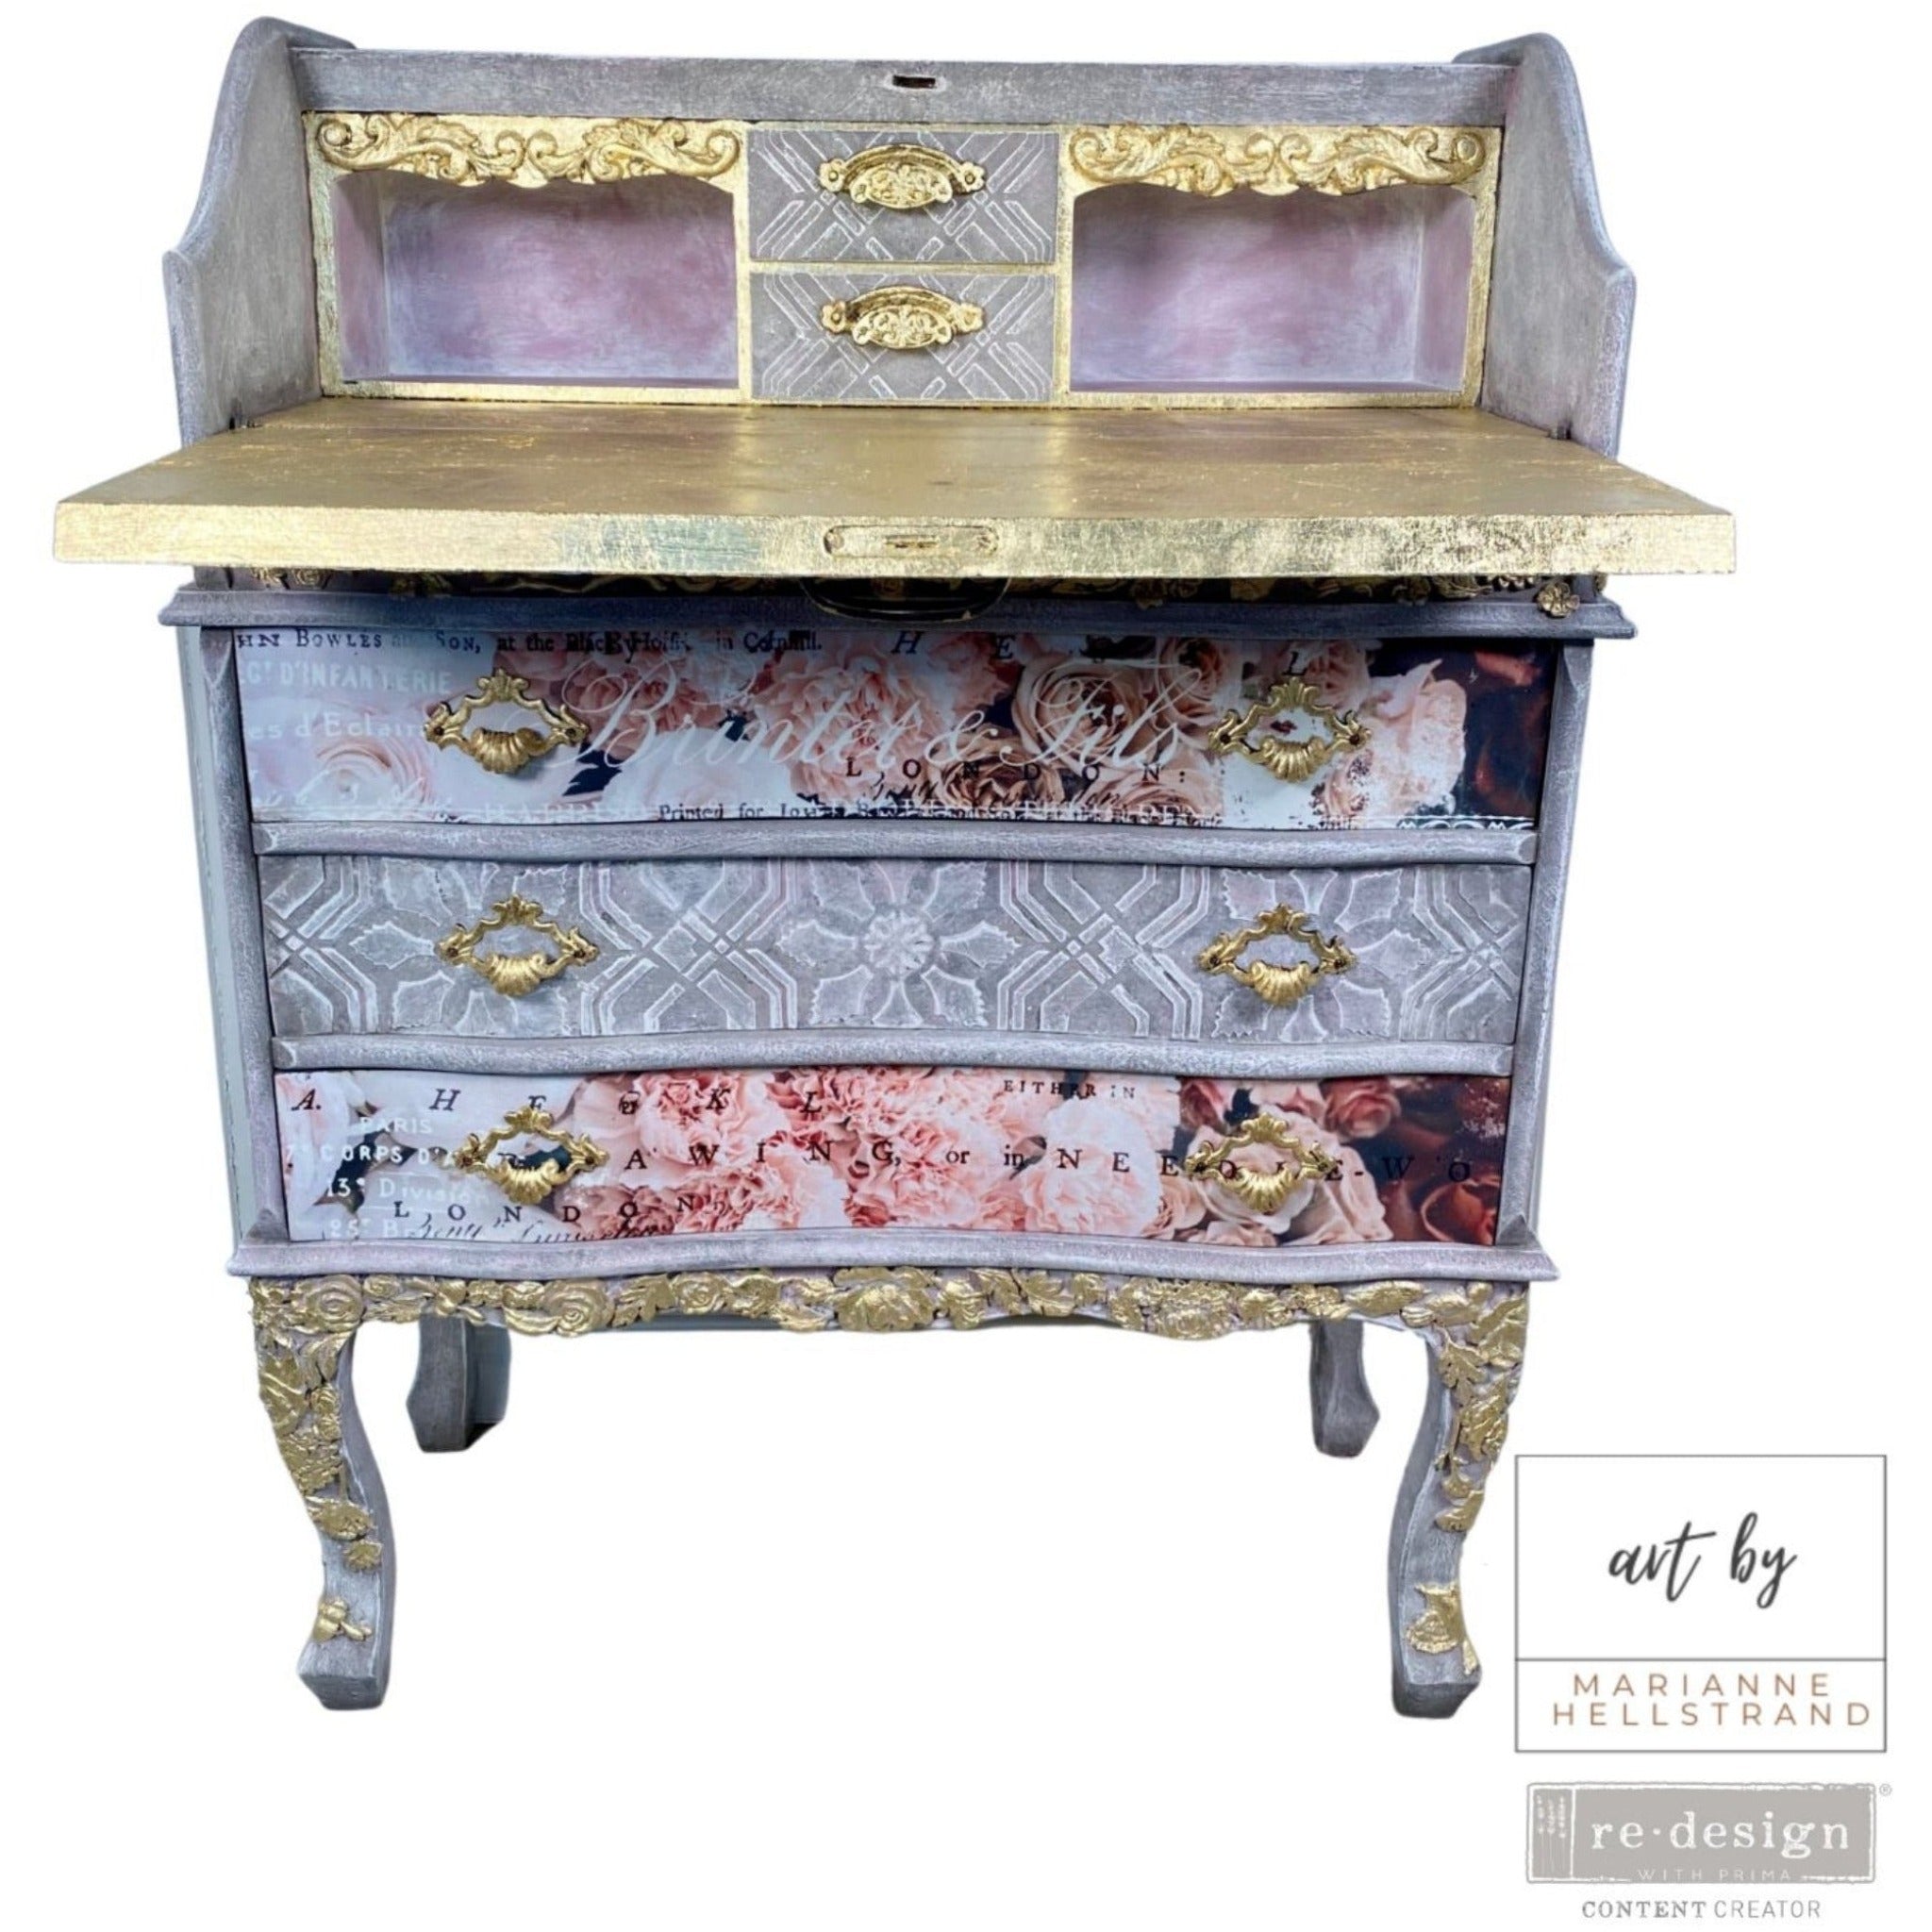 A vintage secretary's desk refurbished by Art by Marianne Hellstrand is painted light blue with gold accents and features the Fragrant Roses silicone mould on it.